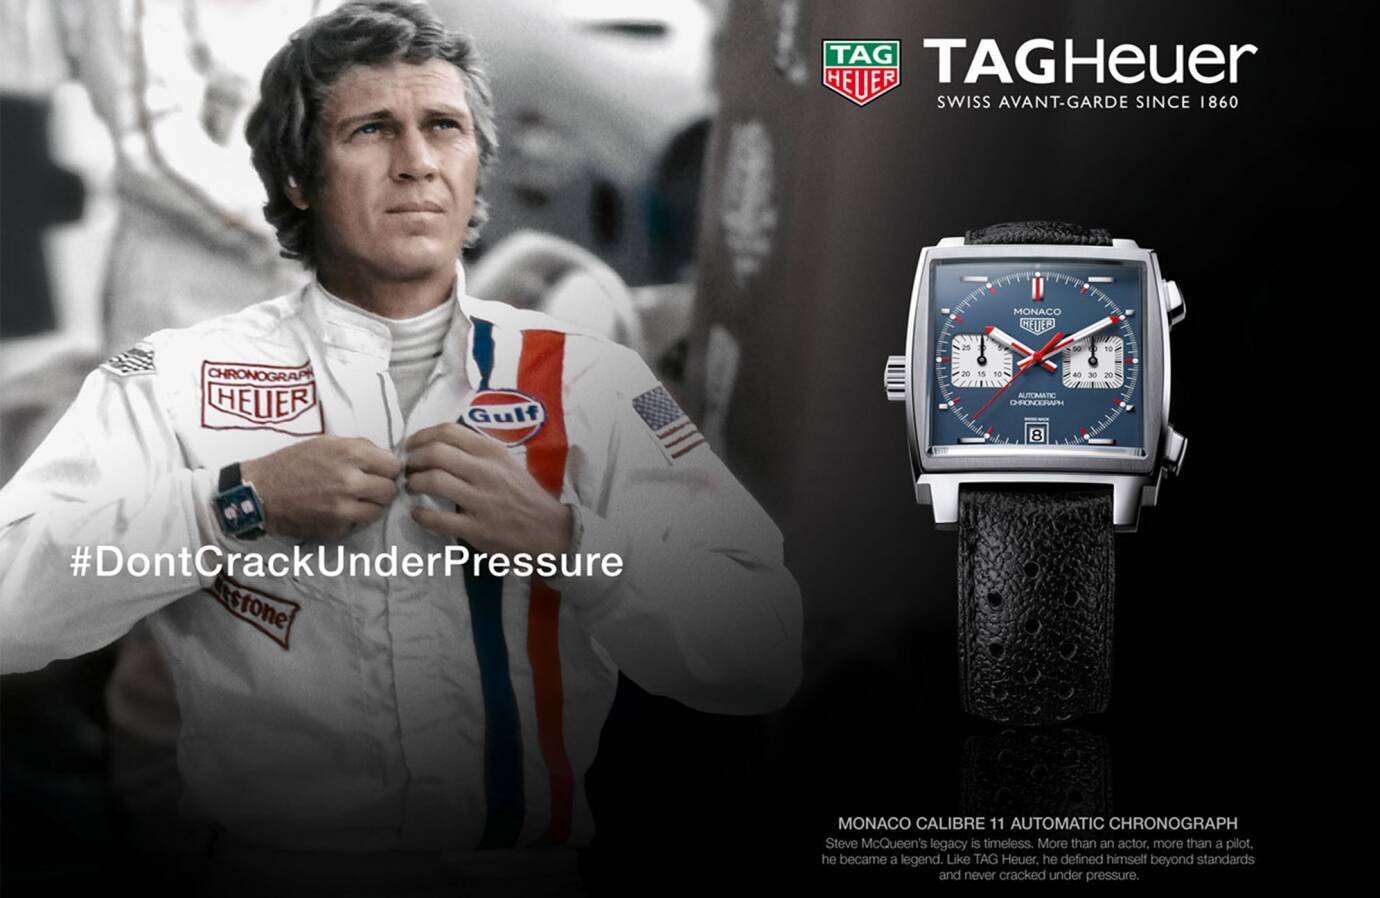 The Best Watch Ads Of The Last 50 Years - Time And Tide Watches